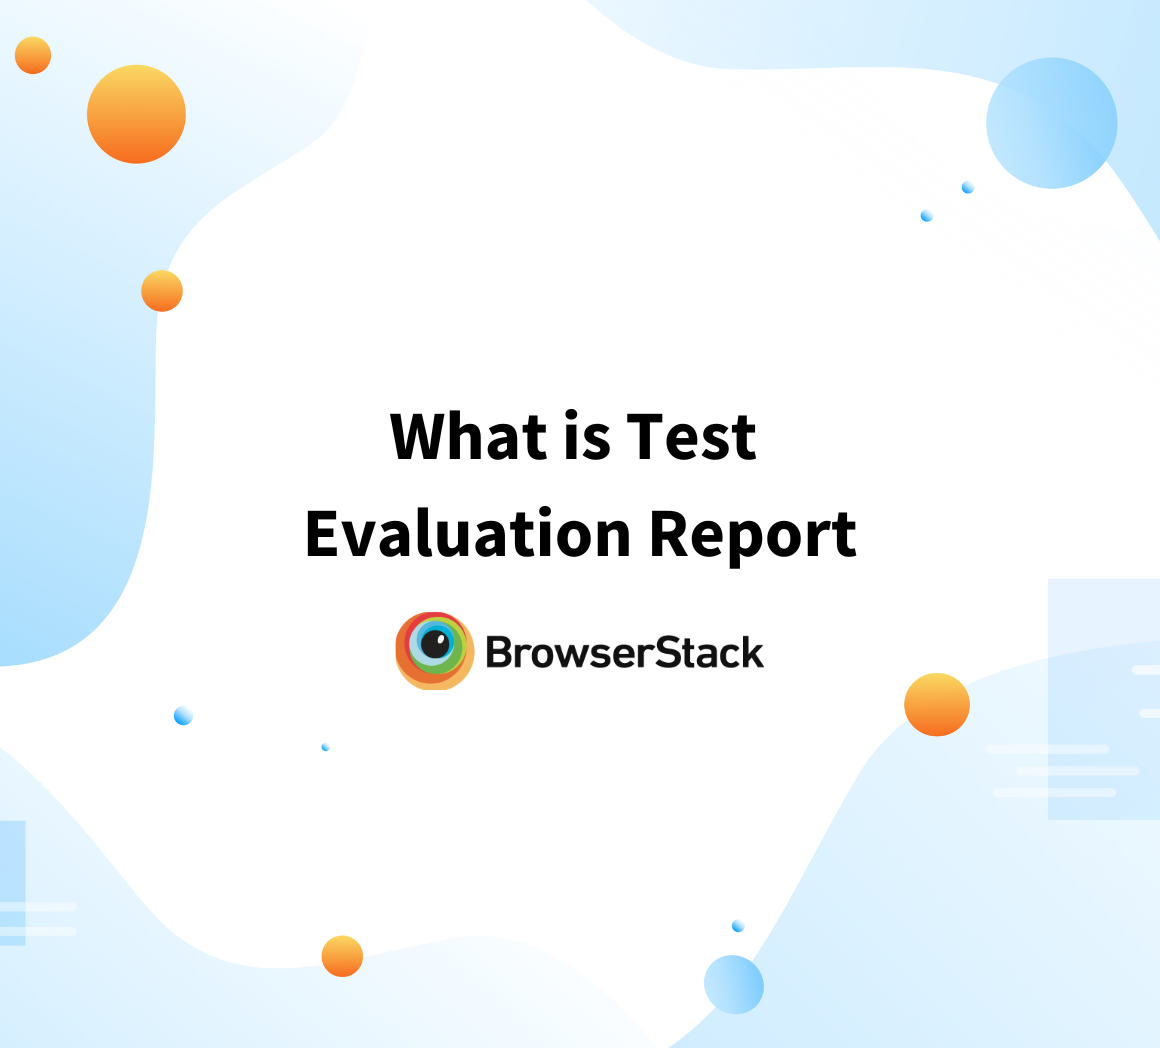 What is Test Evaluation Report